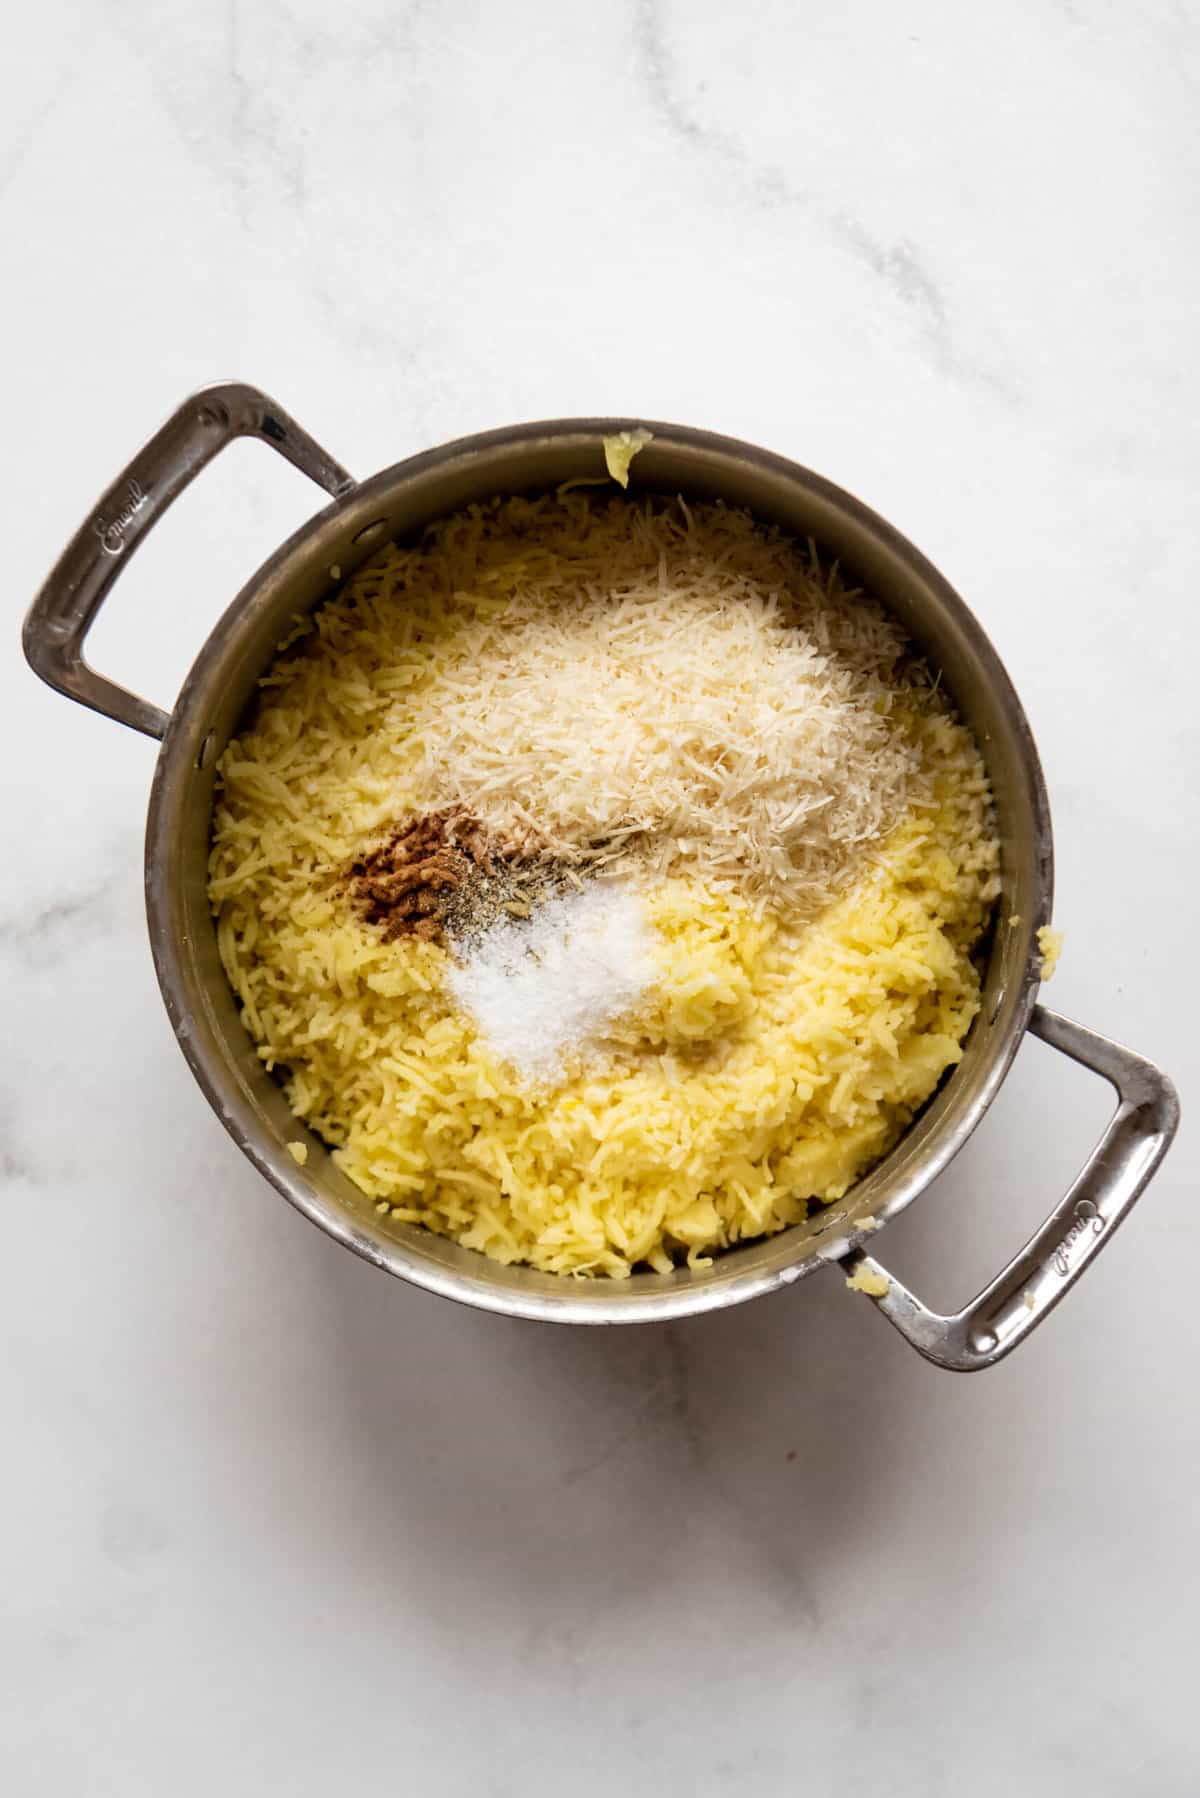 Adding freshly grated Parmesan cheese, nutmeg, salt, butter, and milk to mashed potatoes.